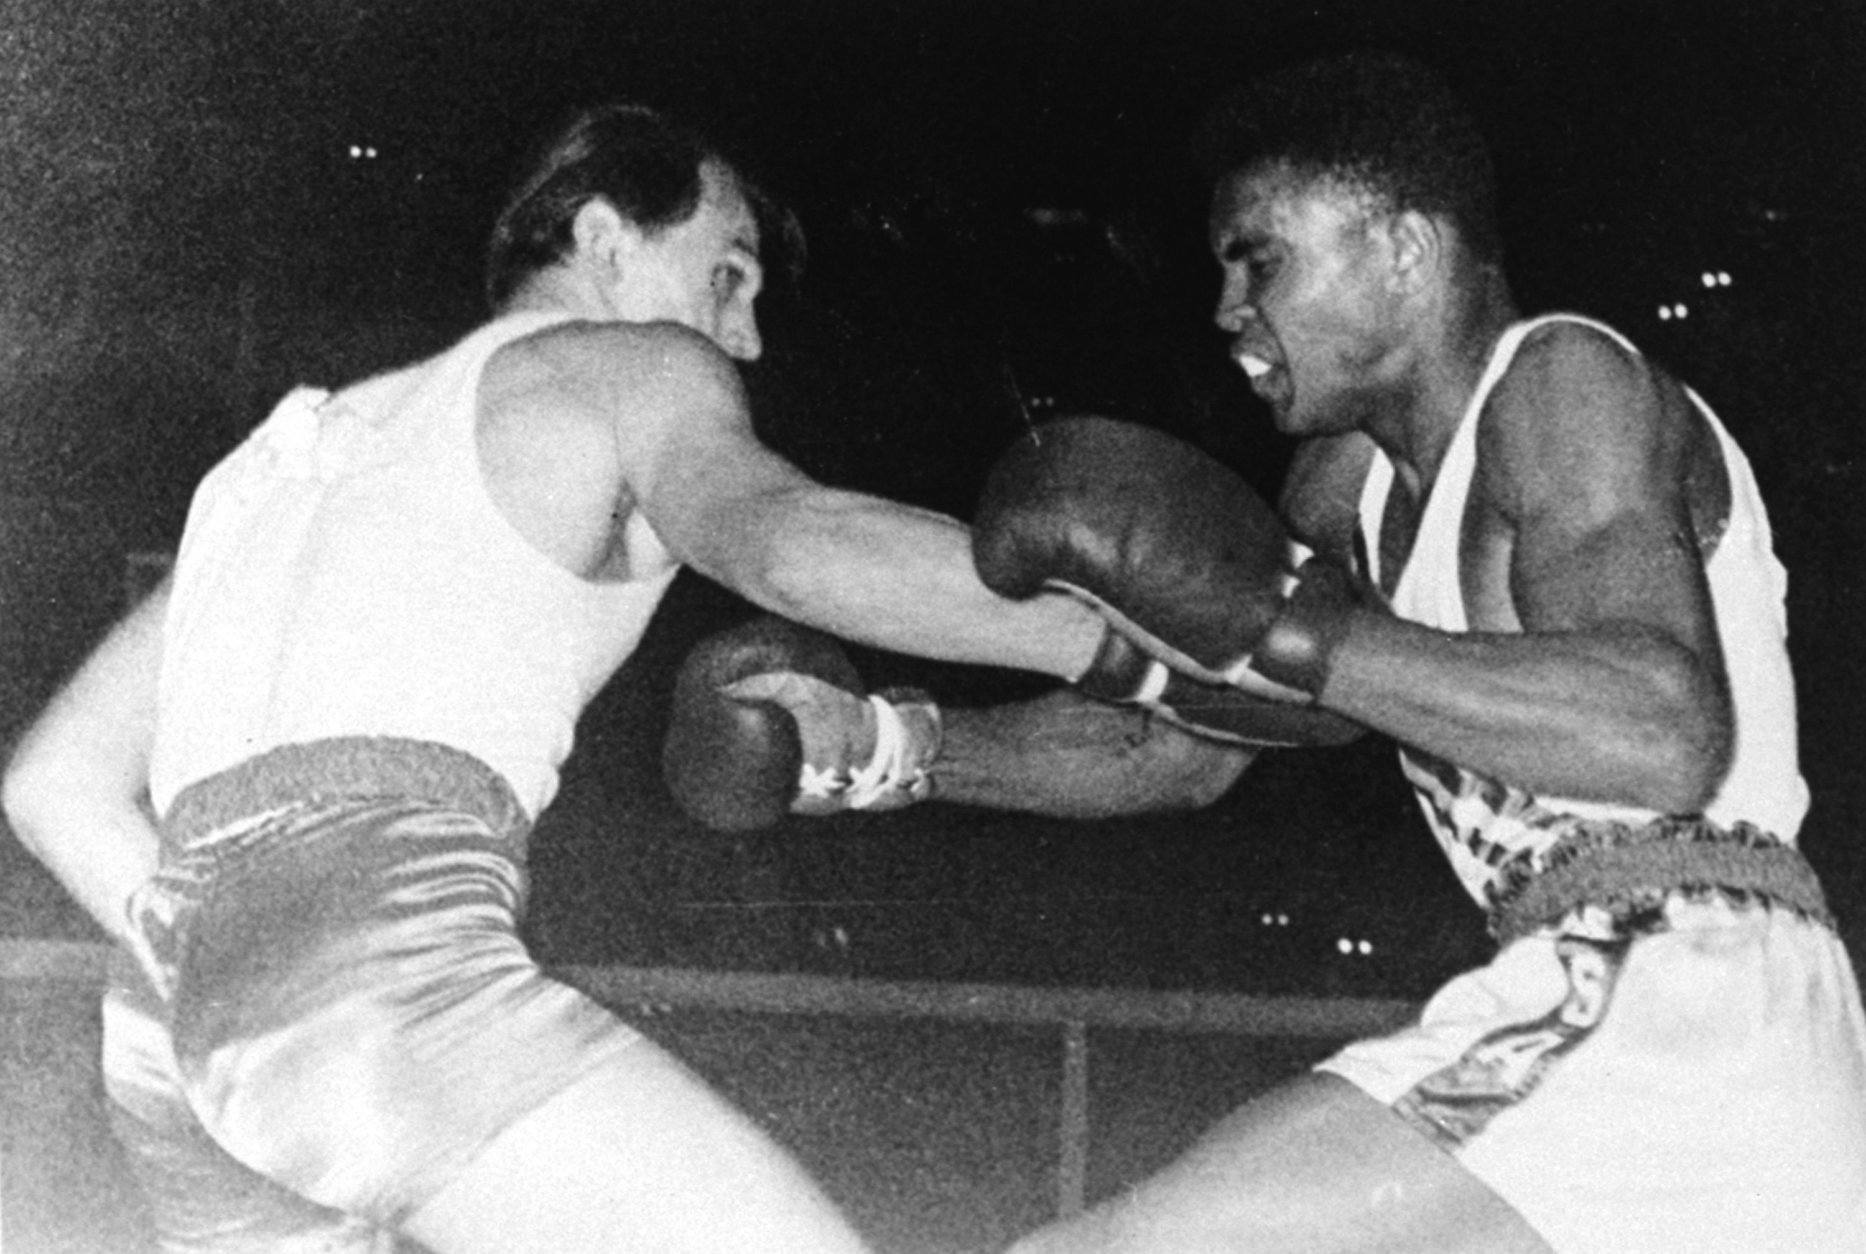 United States Olympic boxer Cassius Clay of Louisville, KY, right, is shown in action during the Olympic bout against Z. Pietrzykowski of Poland in Rome, Italy, September 5, 1960.  Clay outpointed the Pole and won the gold medal in the light heavyweight class for the United States.  (AP Photo)